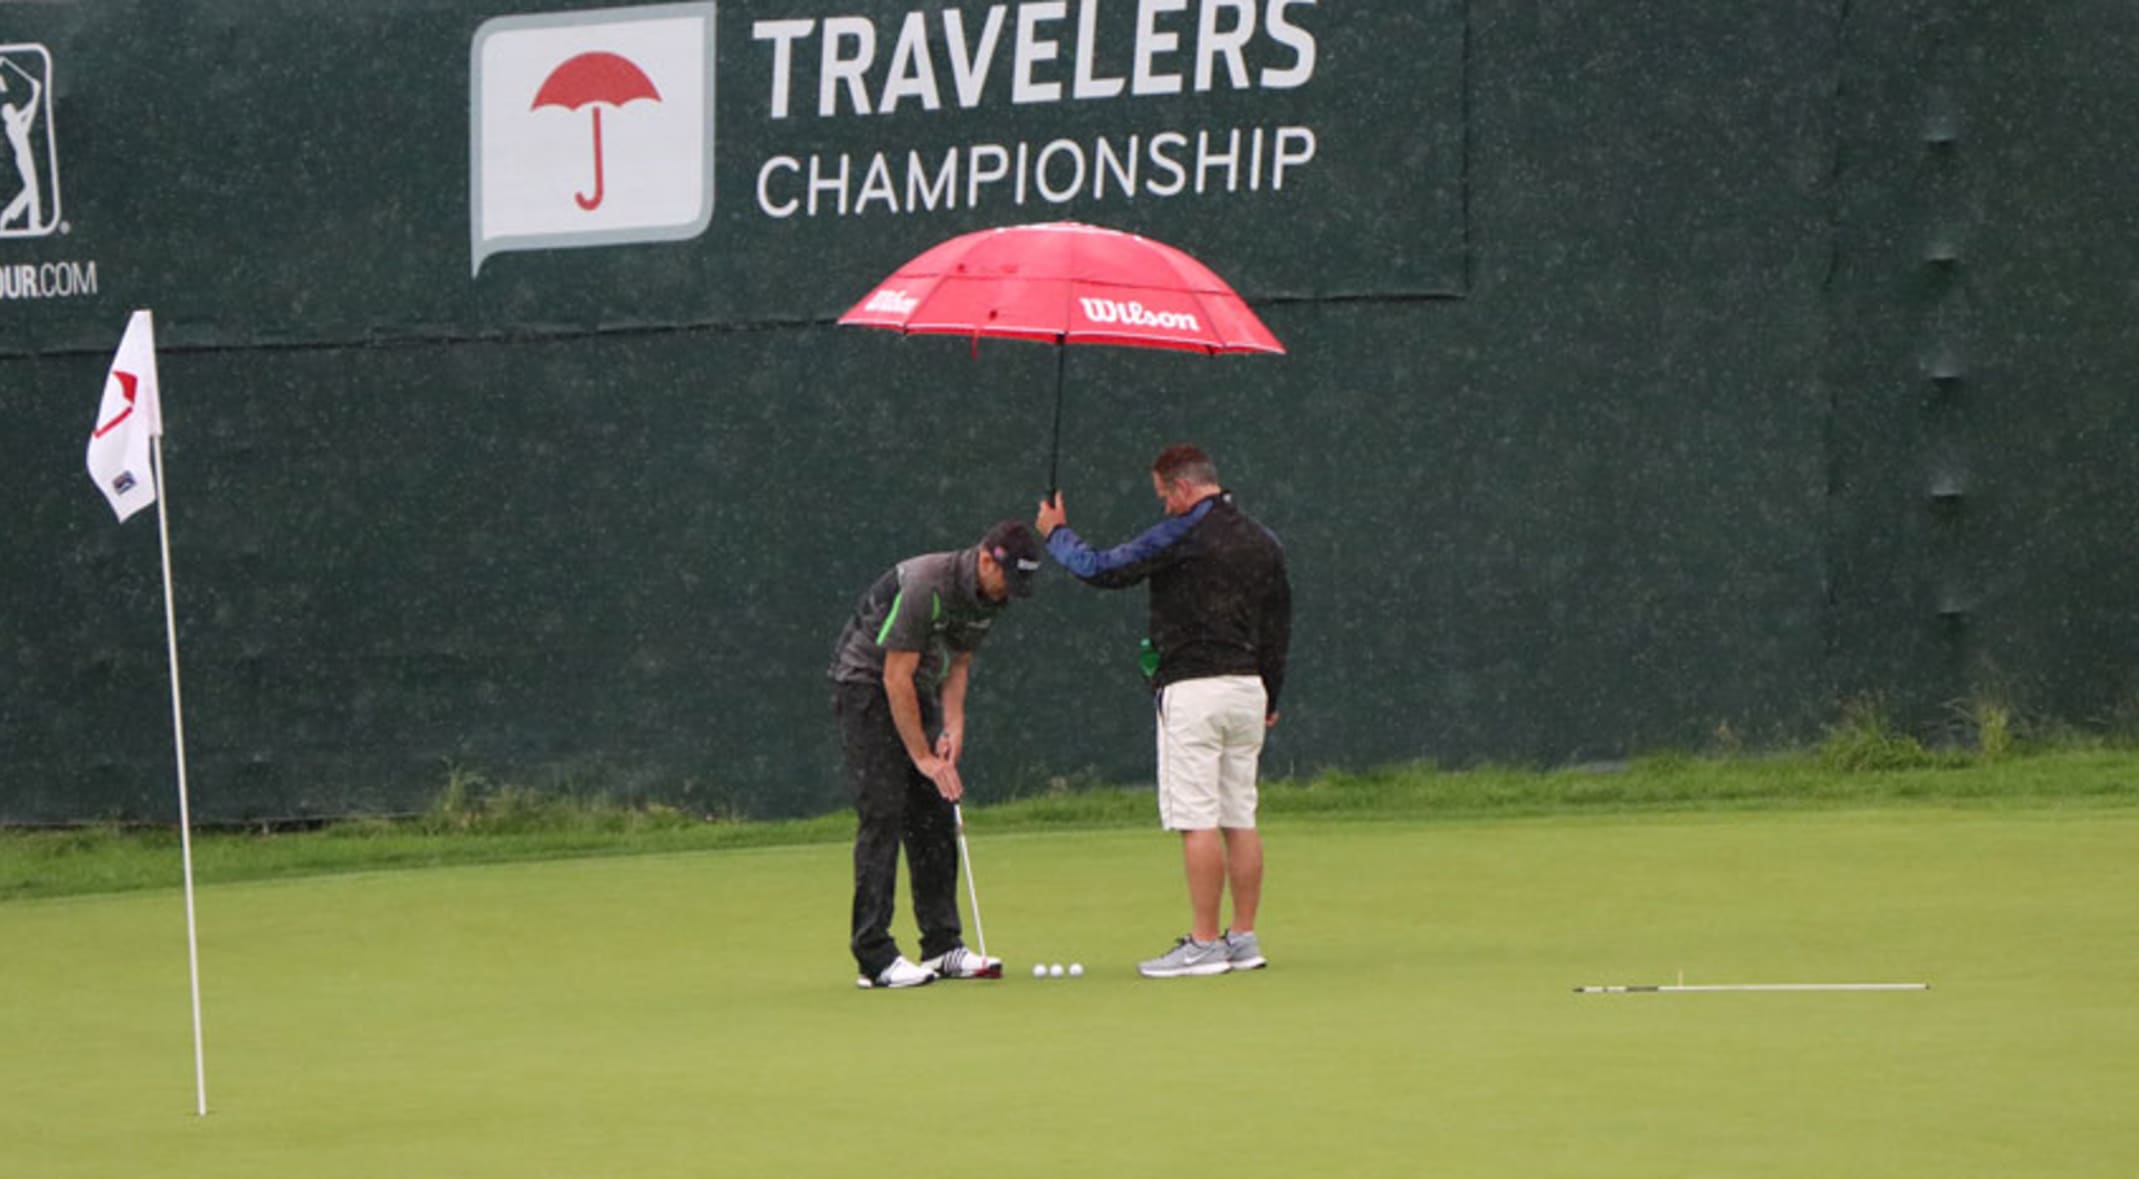 Playing In The Rain Pga Tour Caddies Speak On How To Keep Grips From Getting Wet